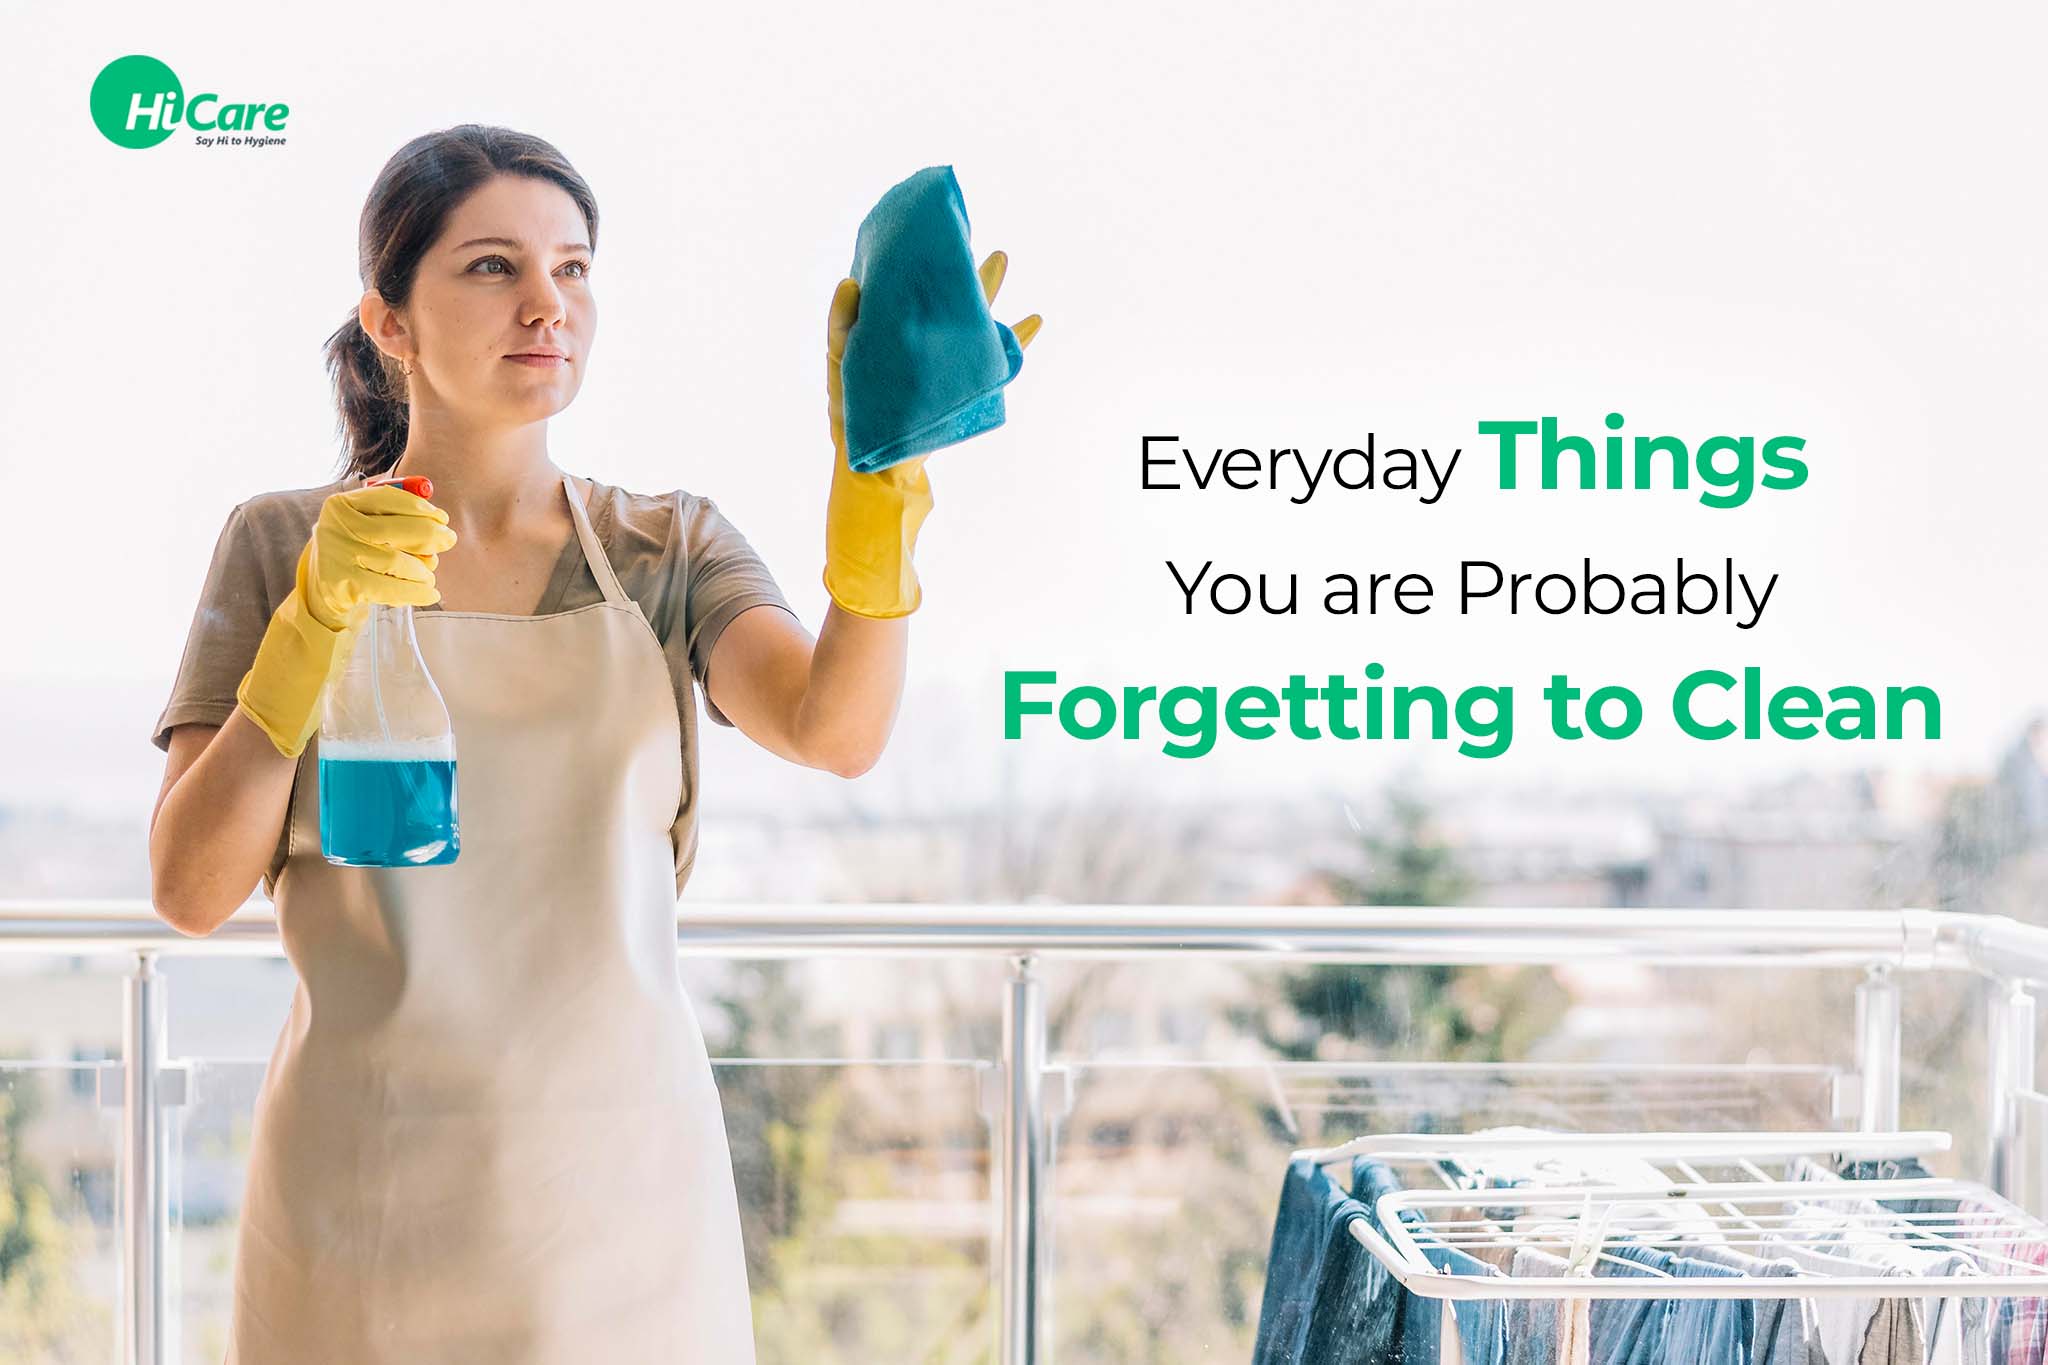 5 Everyday Things You are Probably Forgetting to Clean